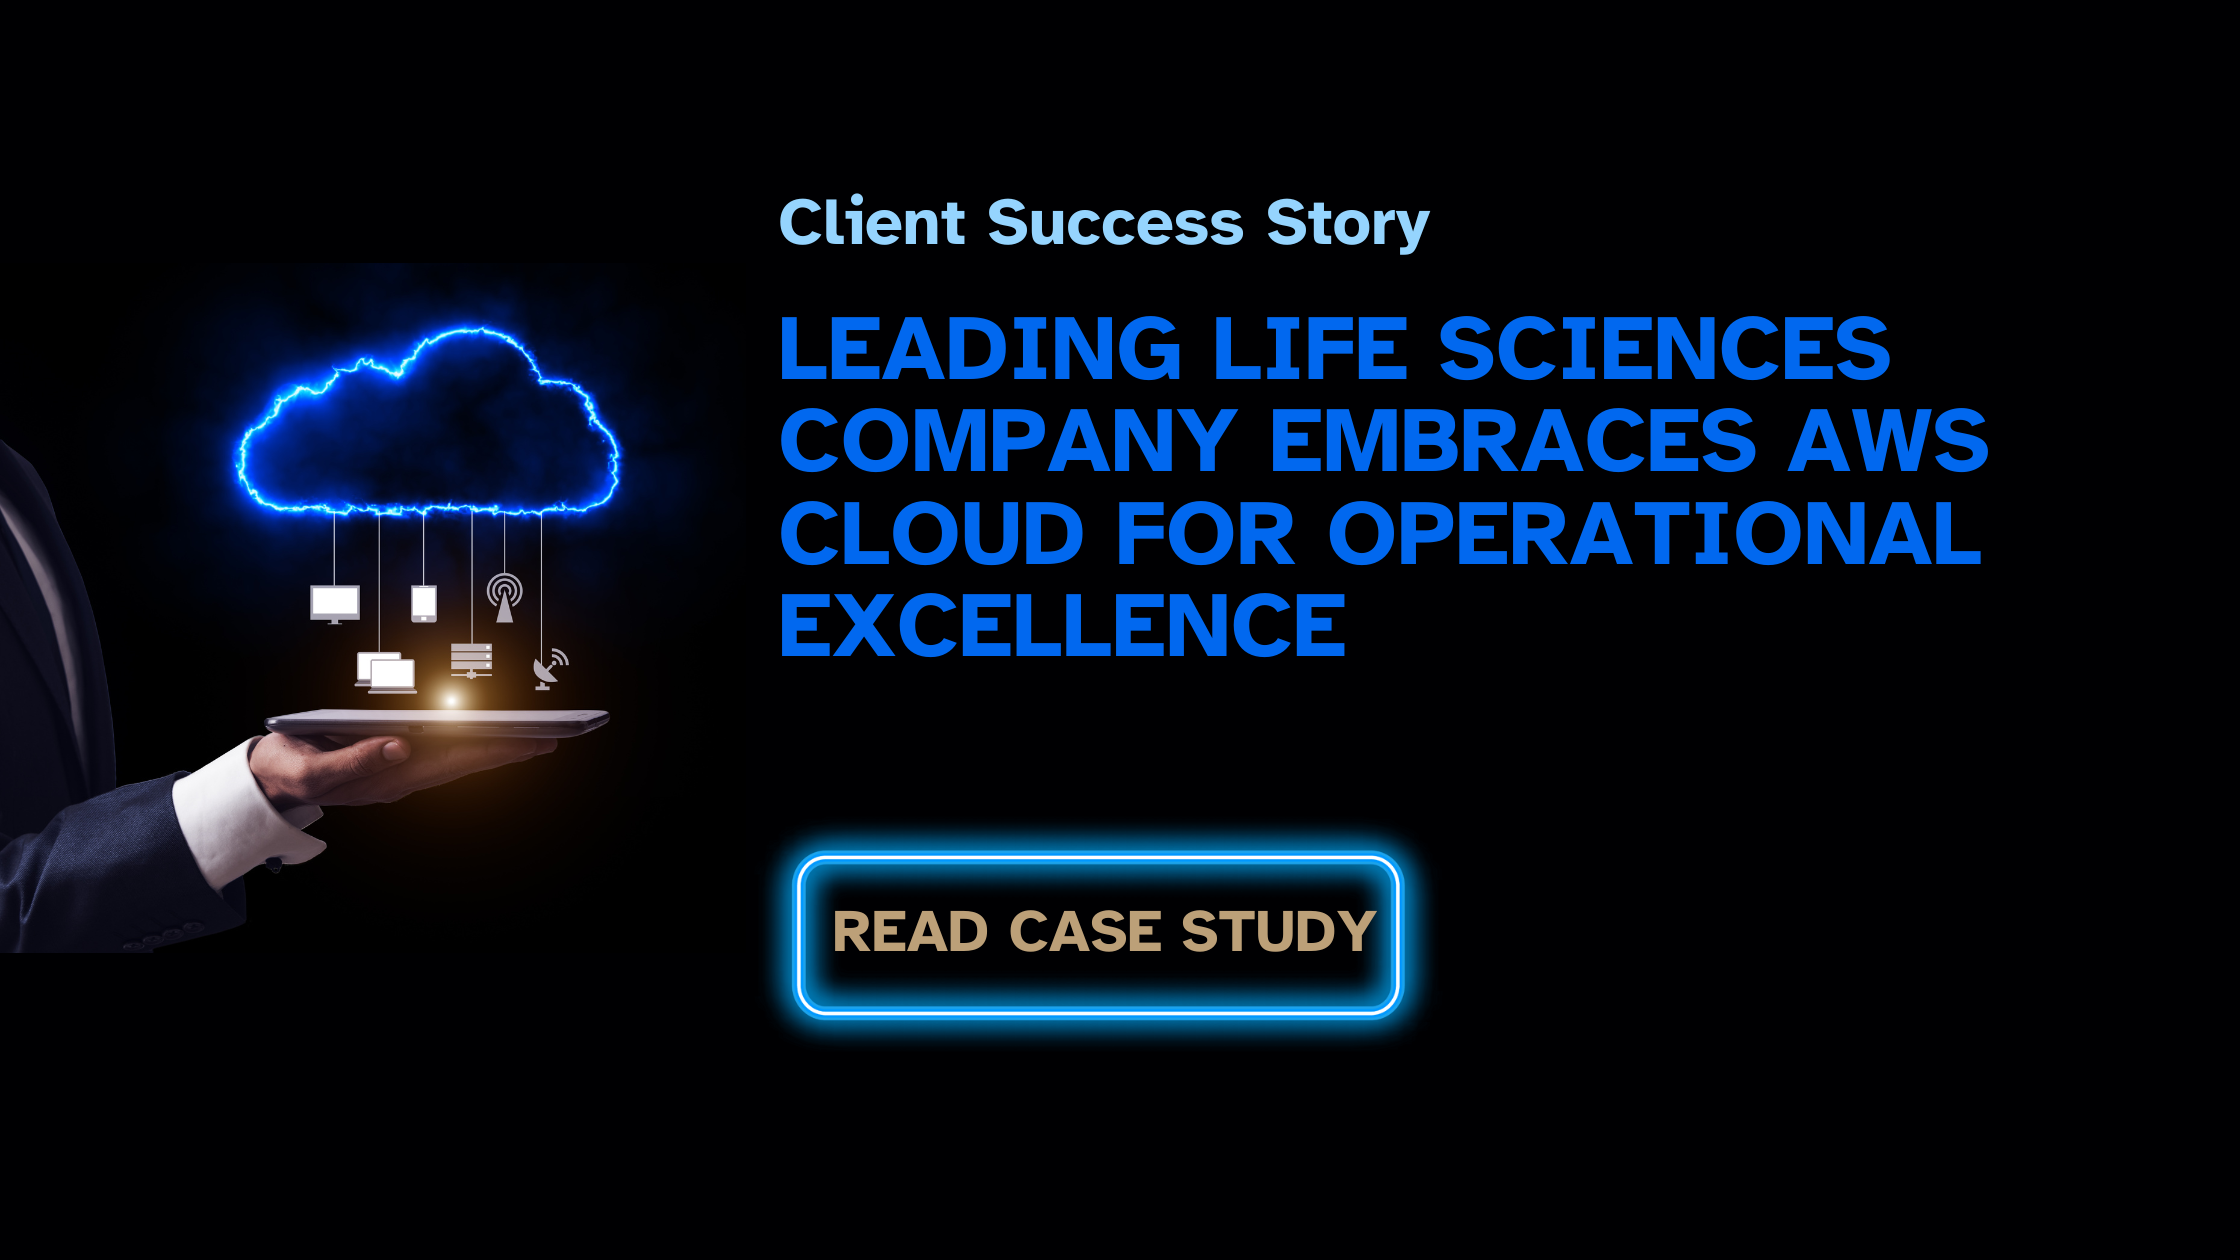 Client Success Story: Leading Life Sciences Company Embraces AWS Cloud For Operational Excellence 